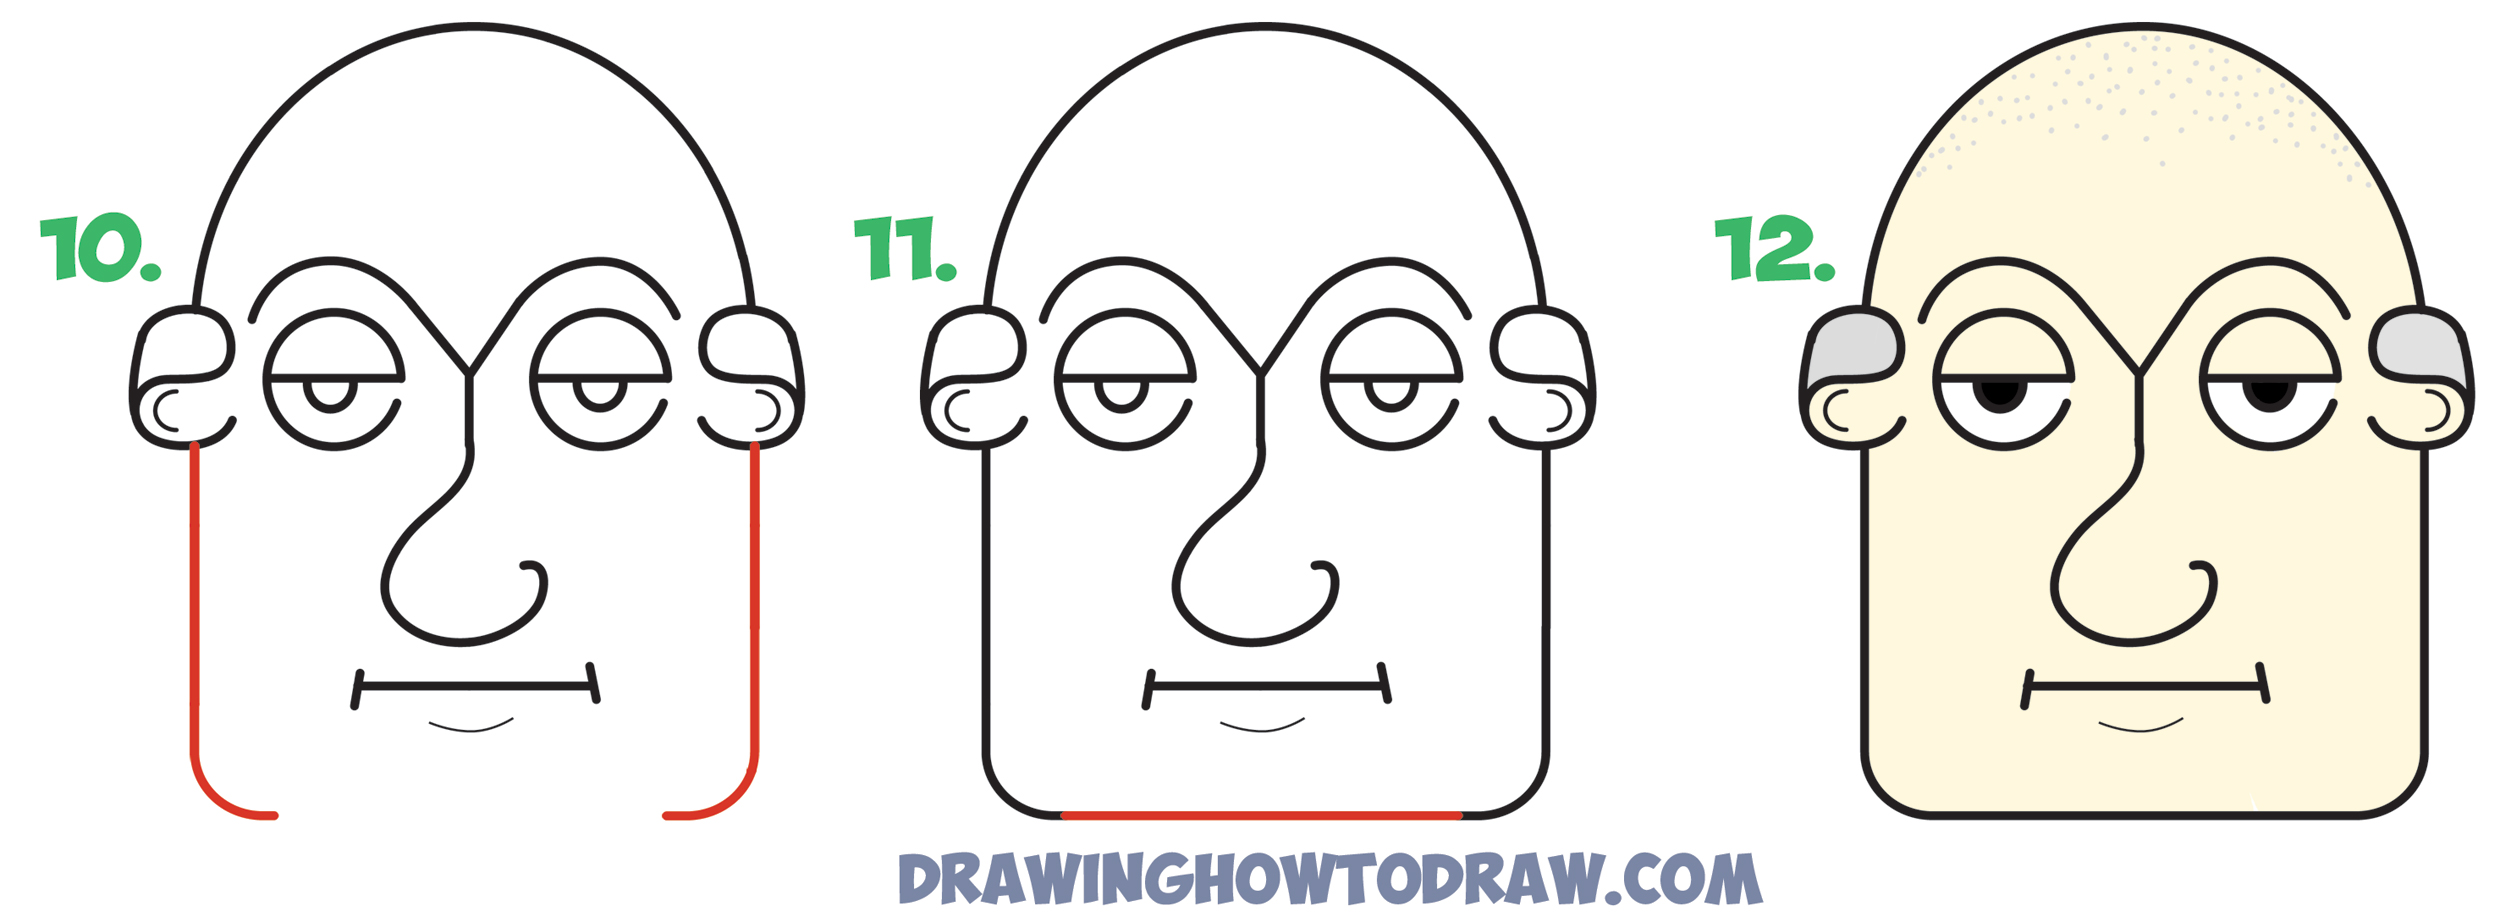 Learn How to Draw Old Man's Face / Head from the word "eyes" in Simple Steps Word Cartoons Lesson for Kids